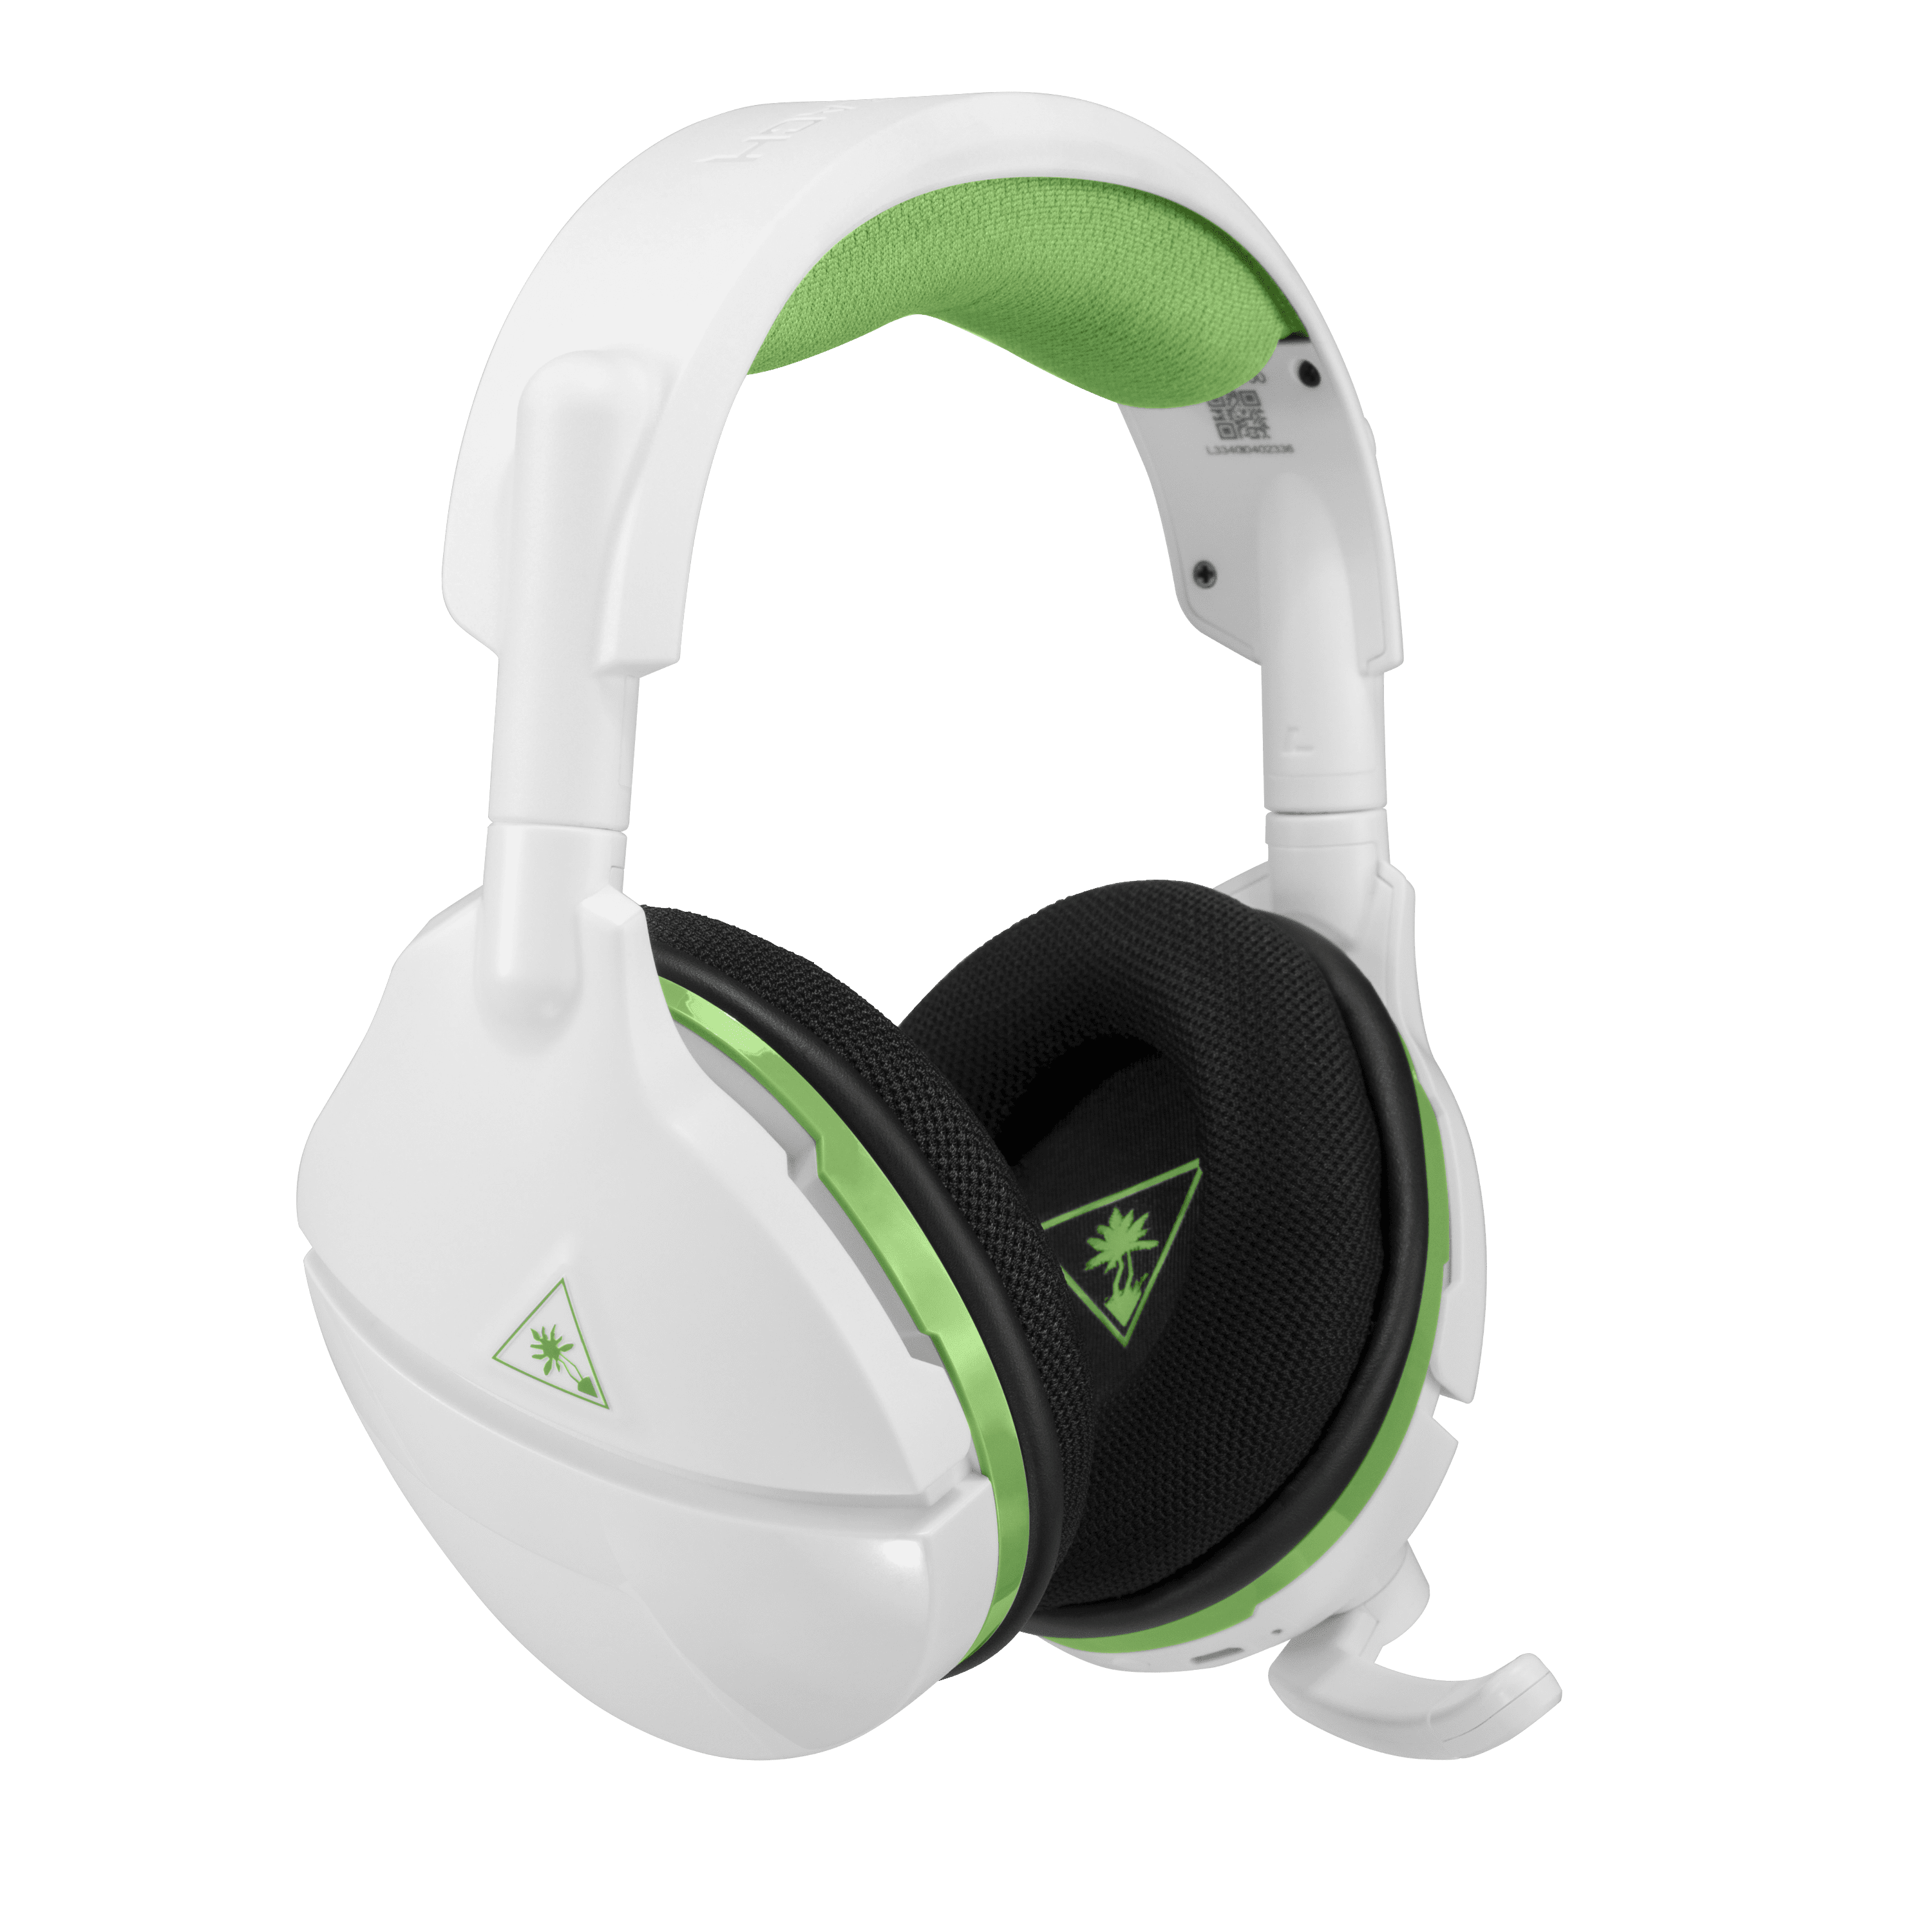 Stealth 600 Headset - xbox one - White